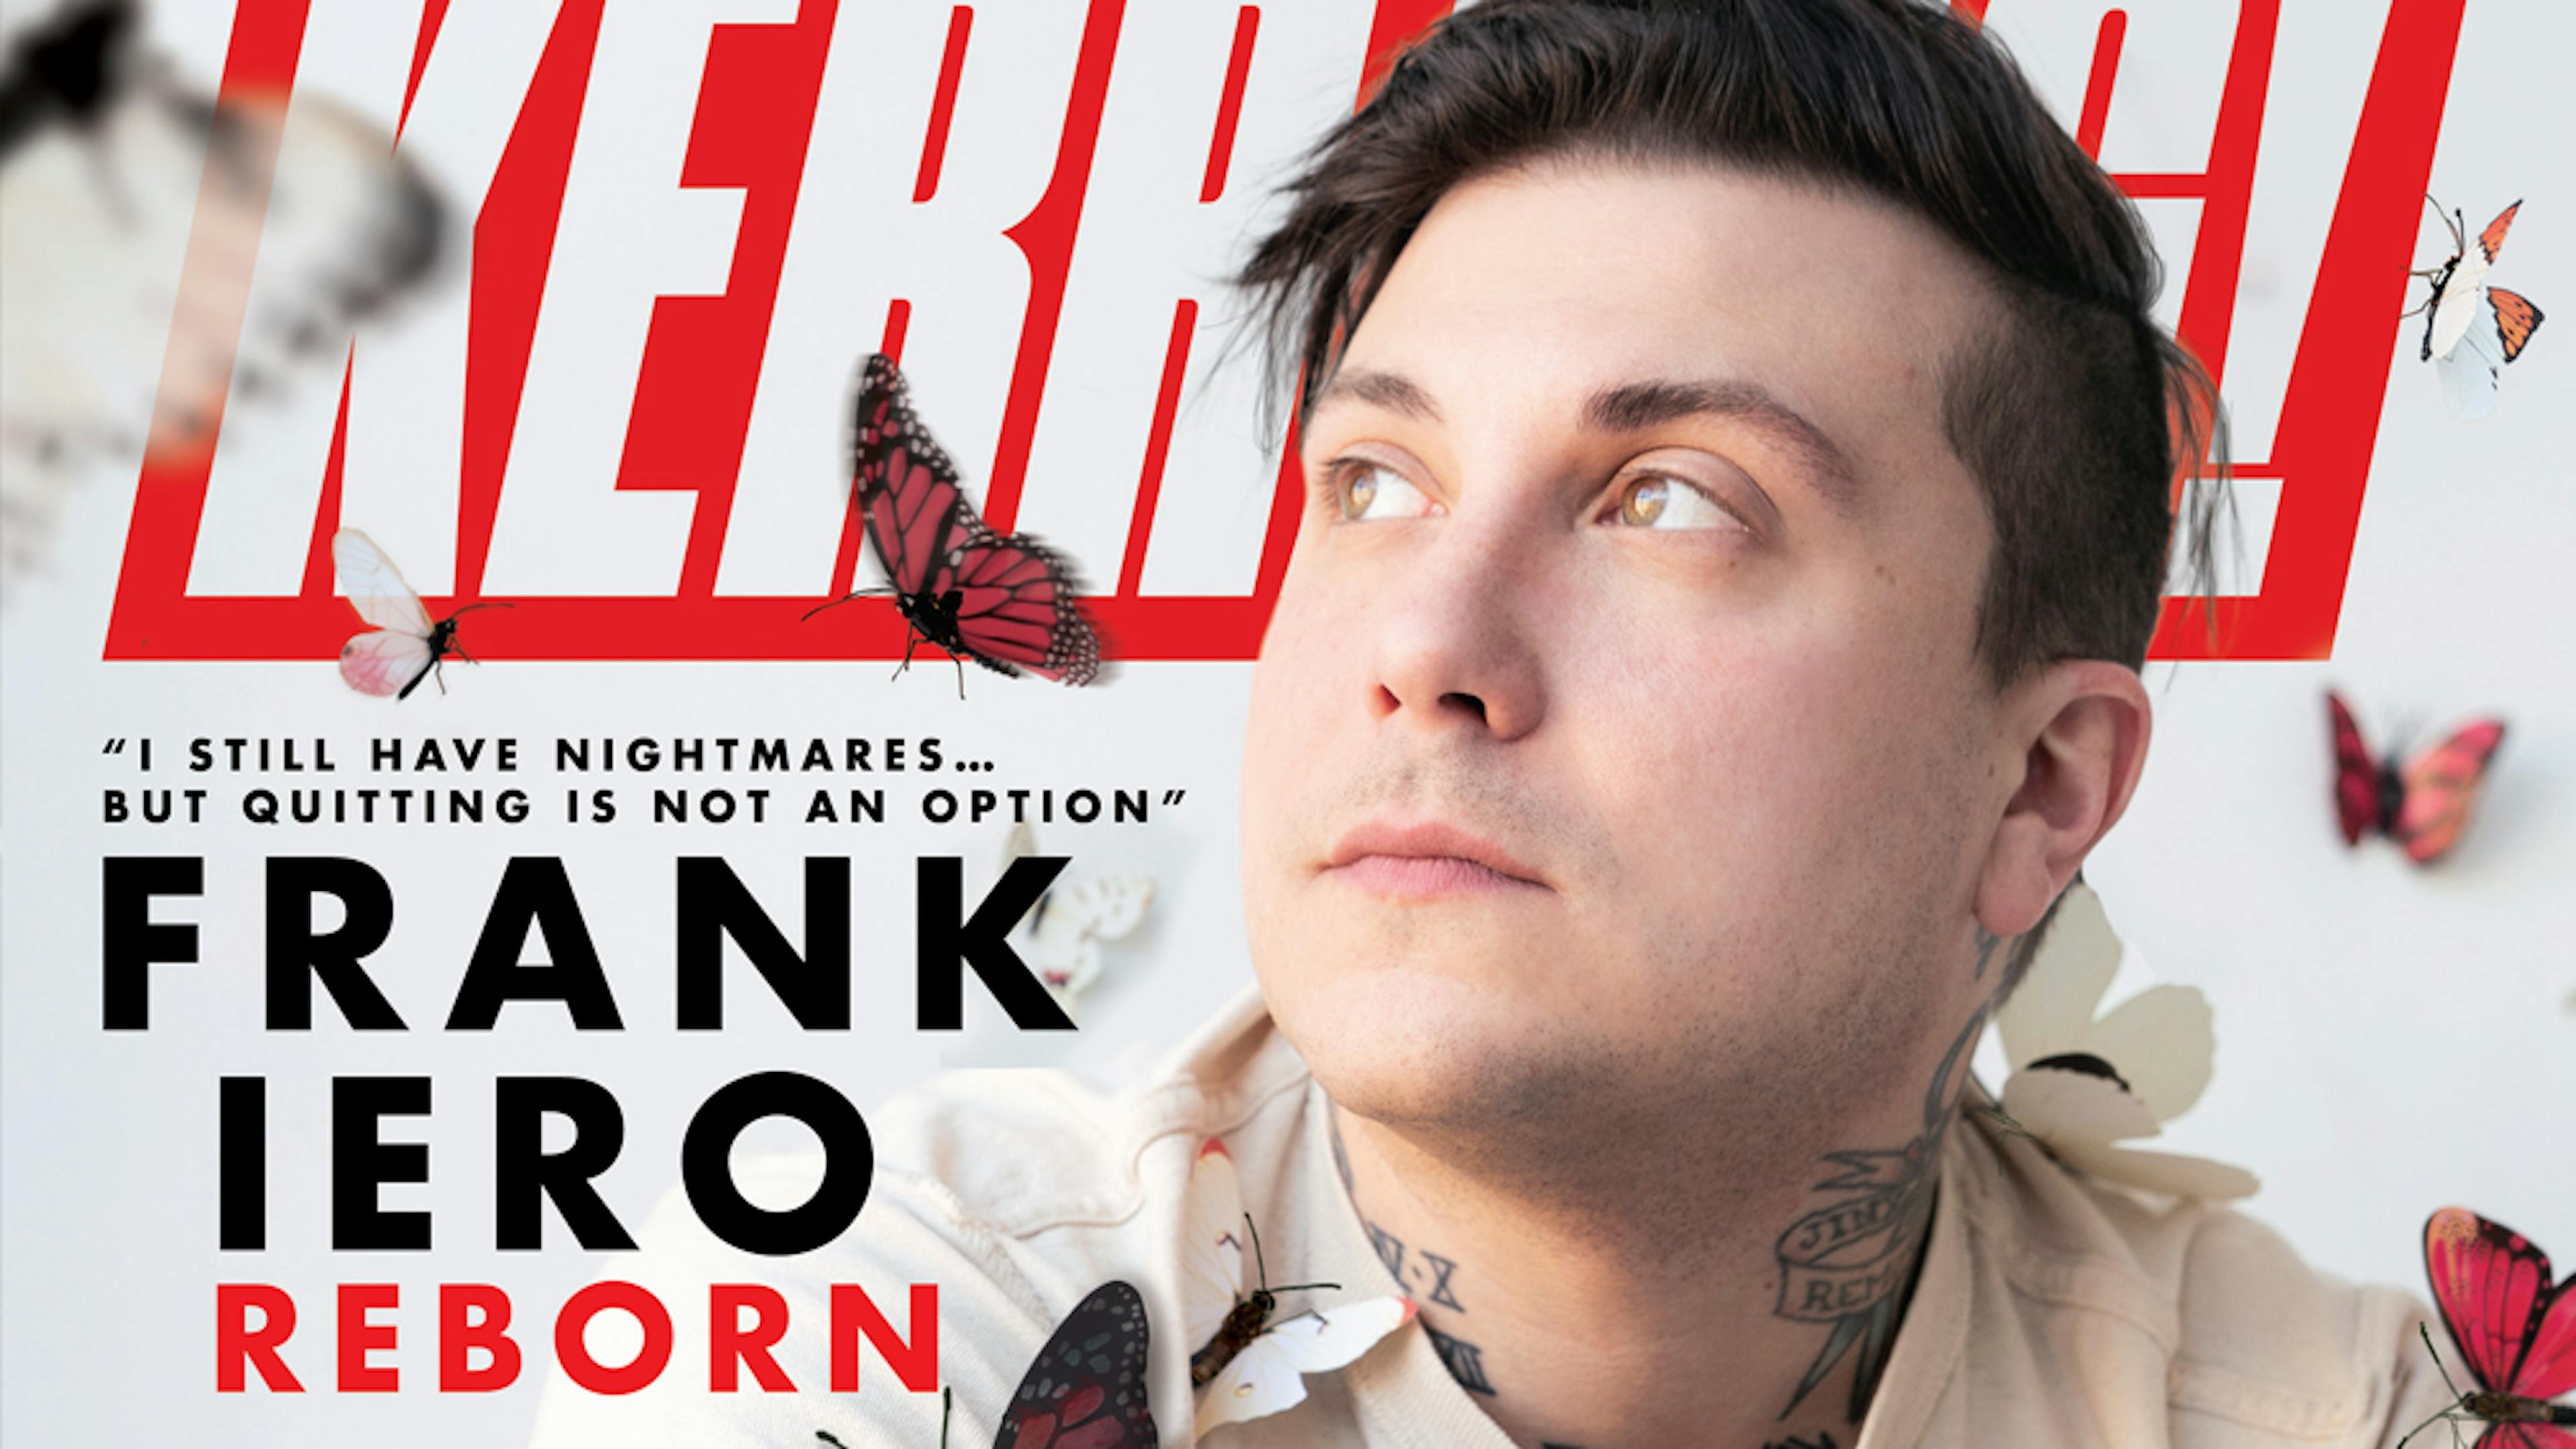 Frank Iero: “I Still Have Nightmares… But Quitting Is Not An Option”